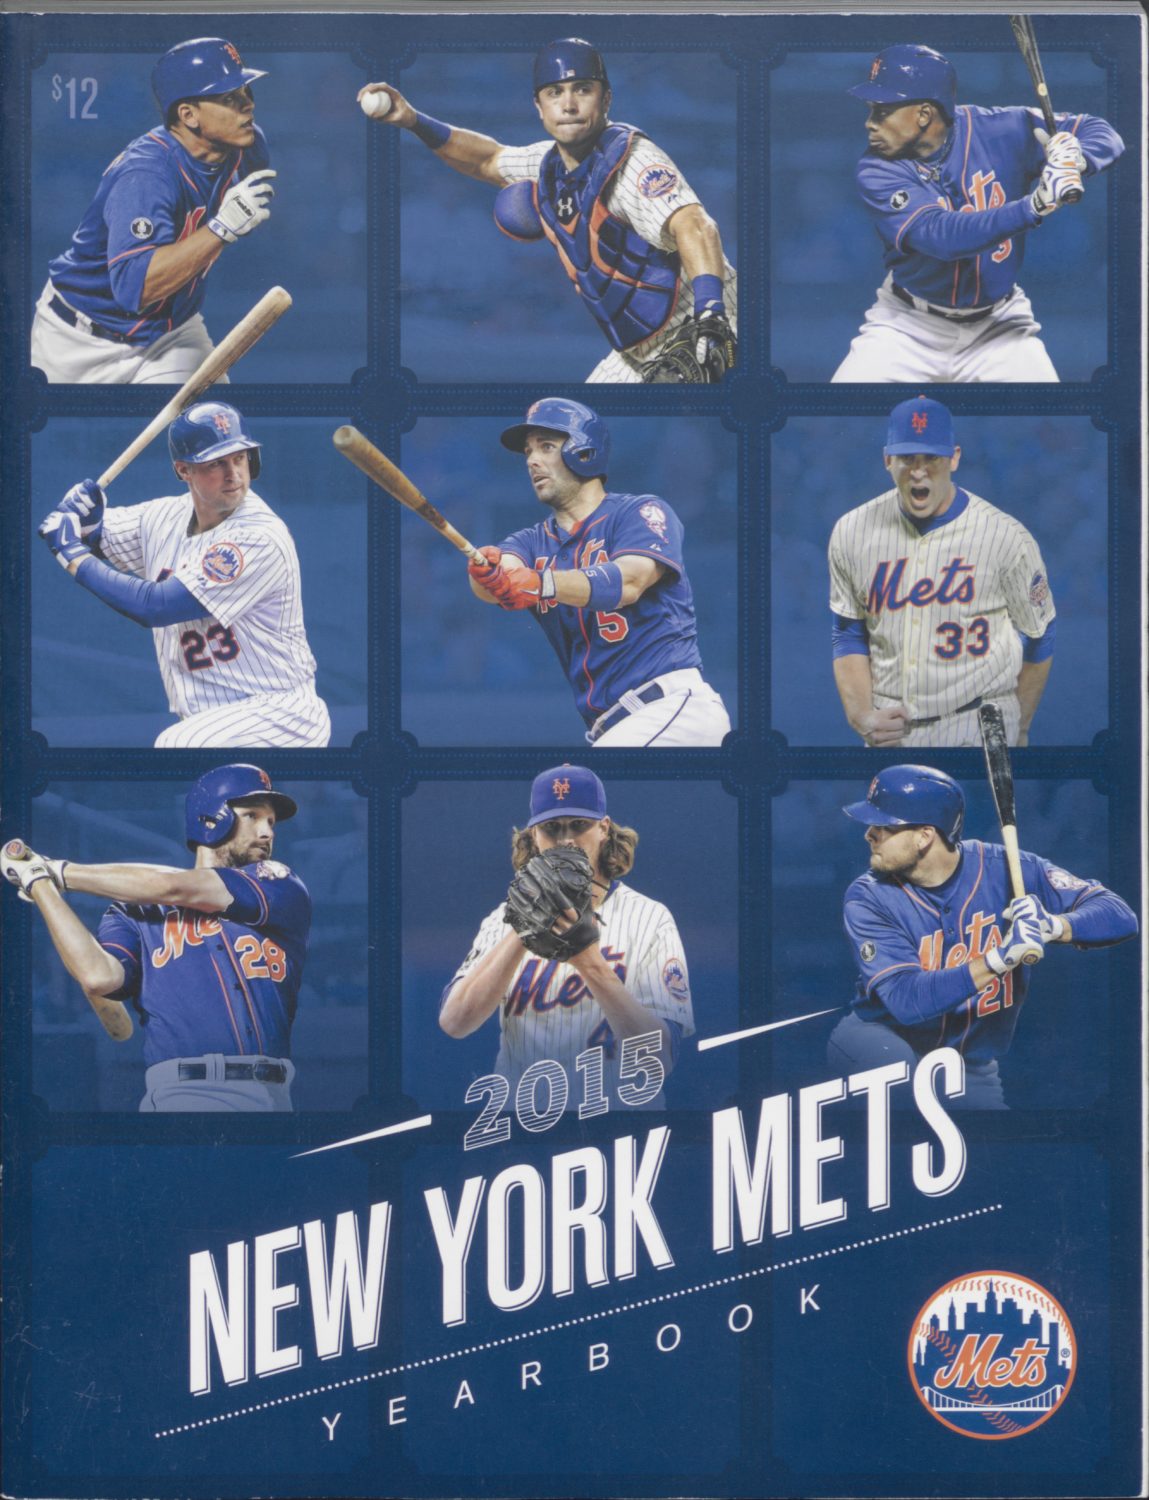 2015 Mets Yearbook Featuring 9 Players on Cover